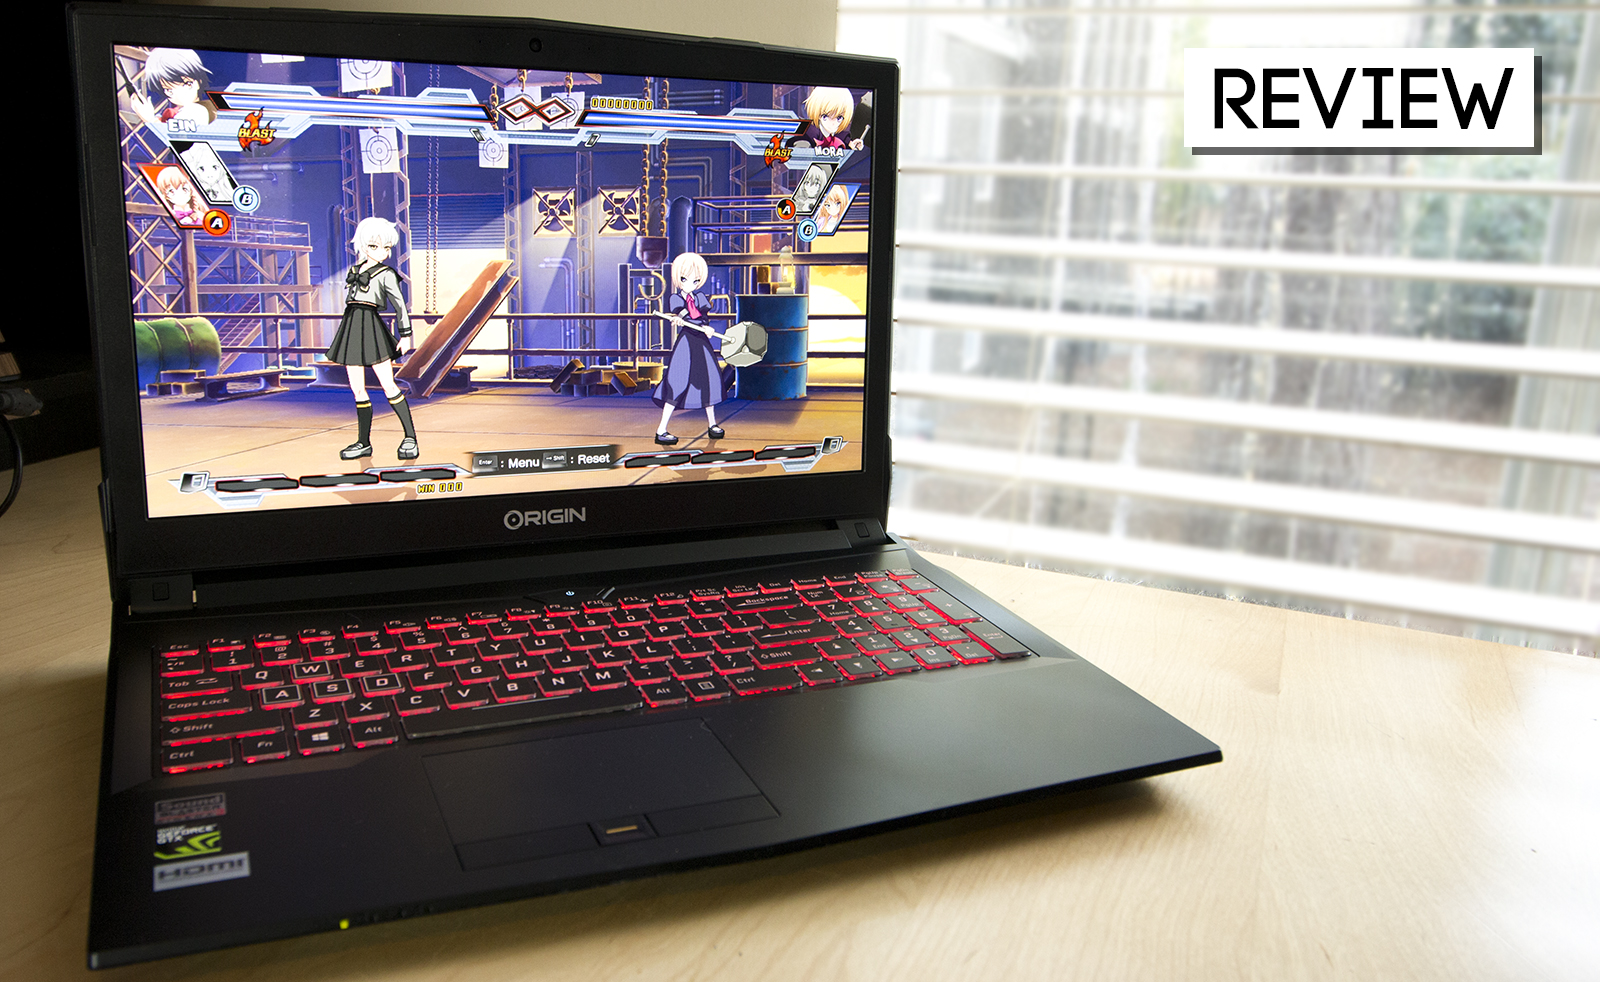 Origin PC Review: What Budget Gaming Laptop Looks Like These Days